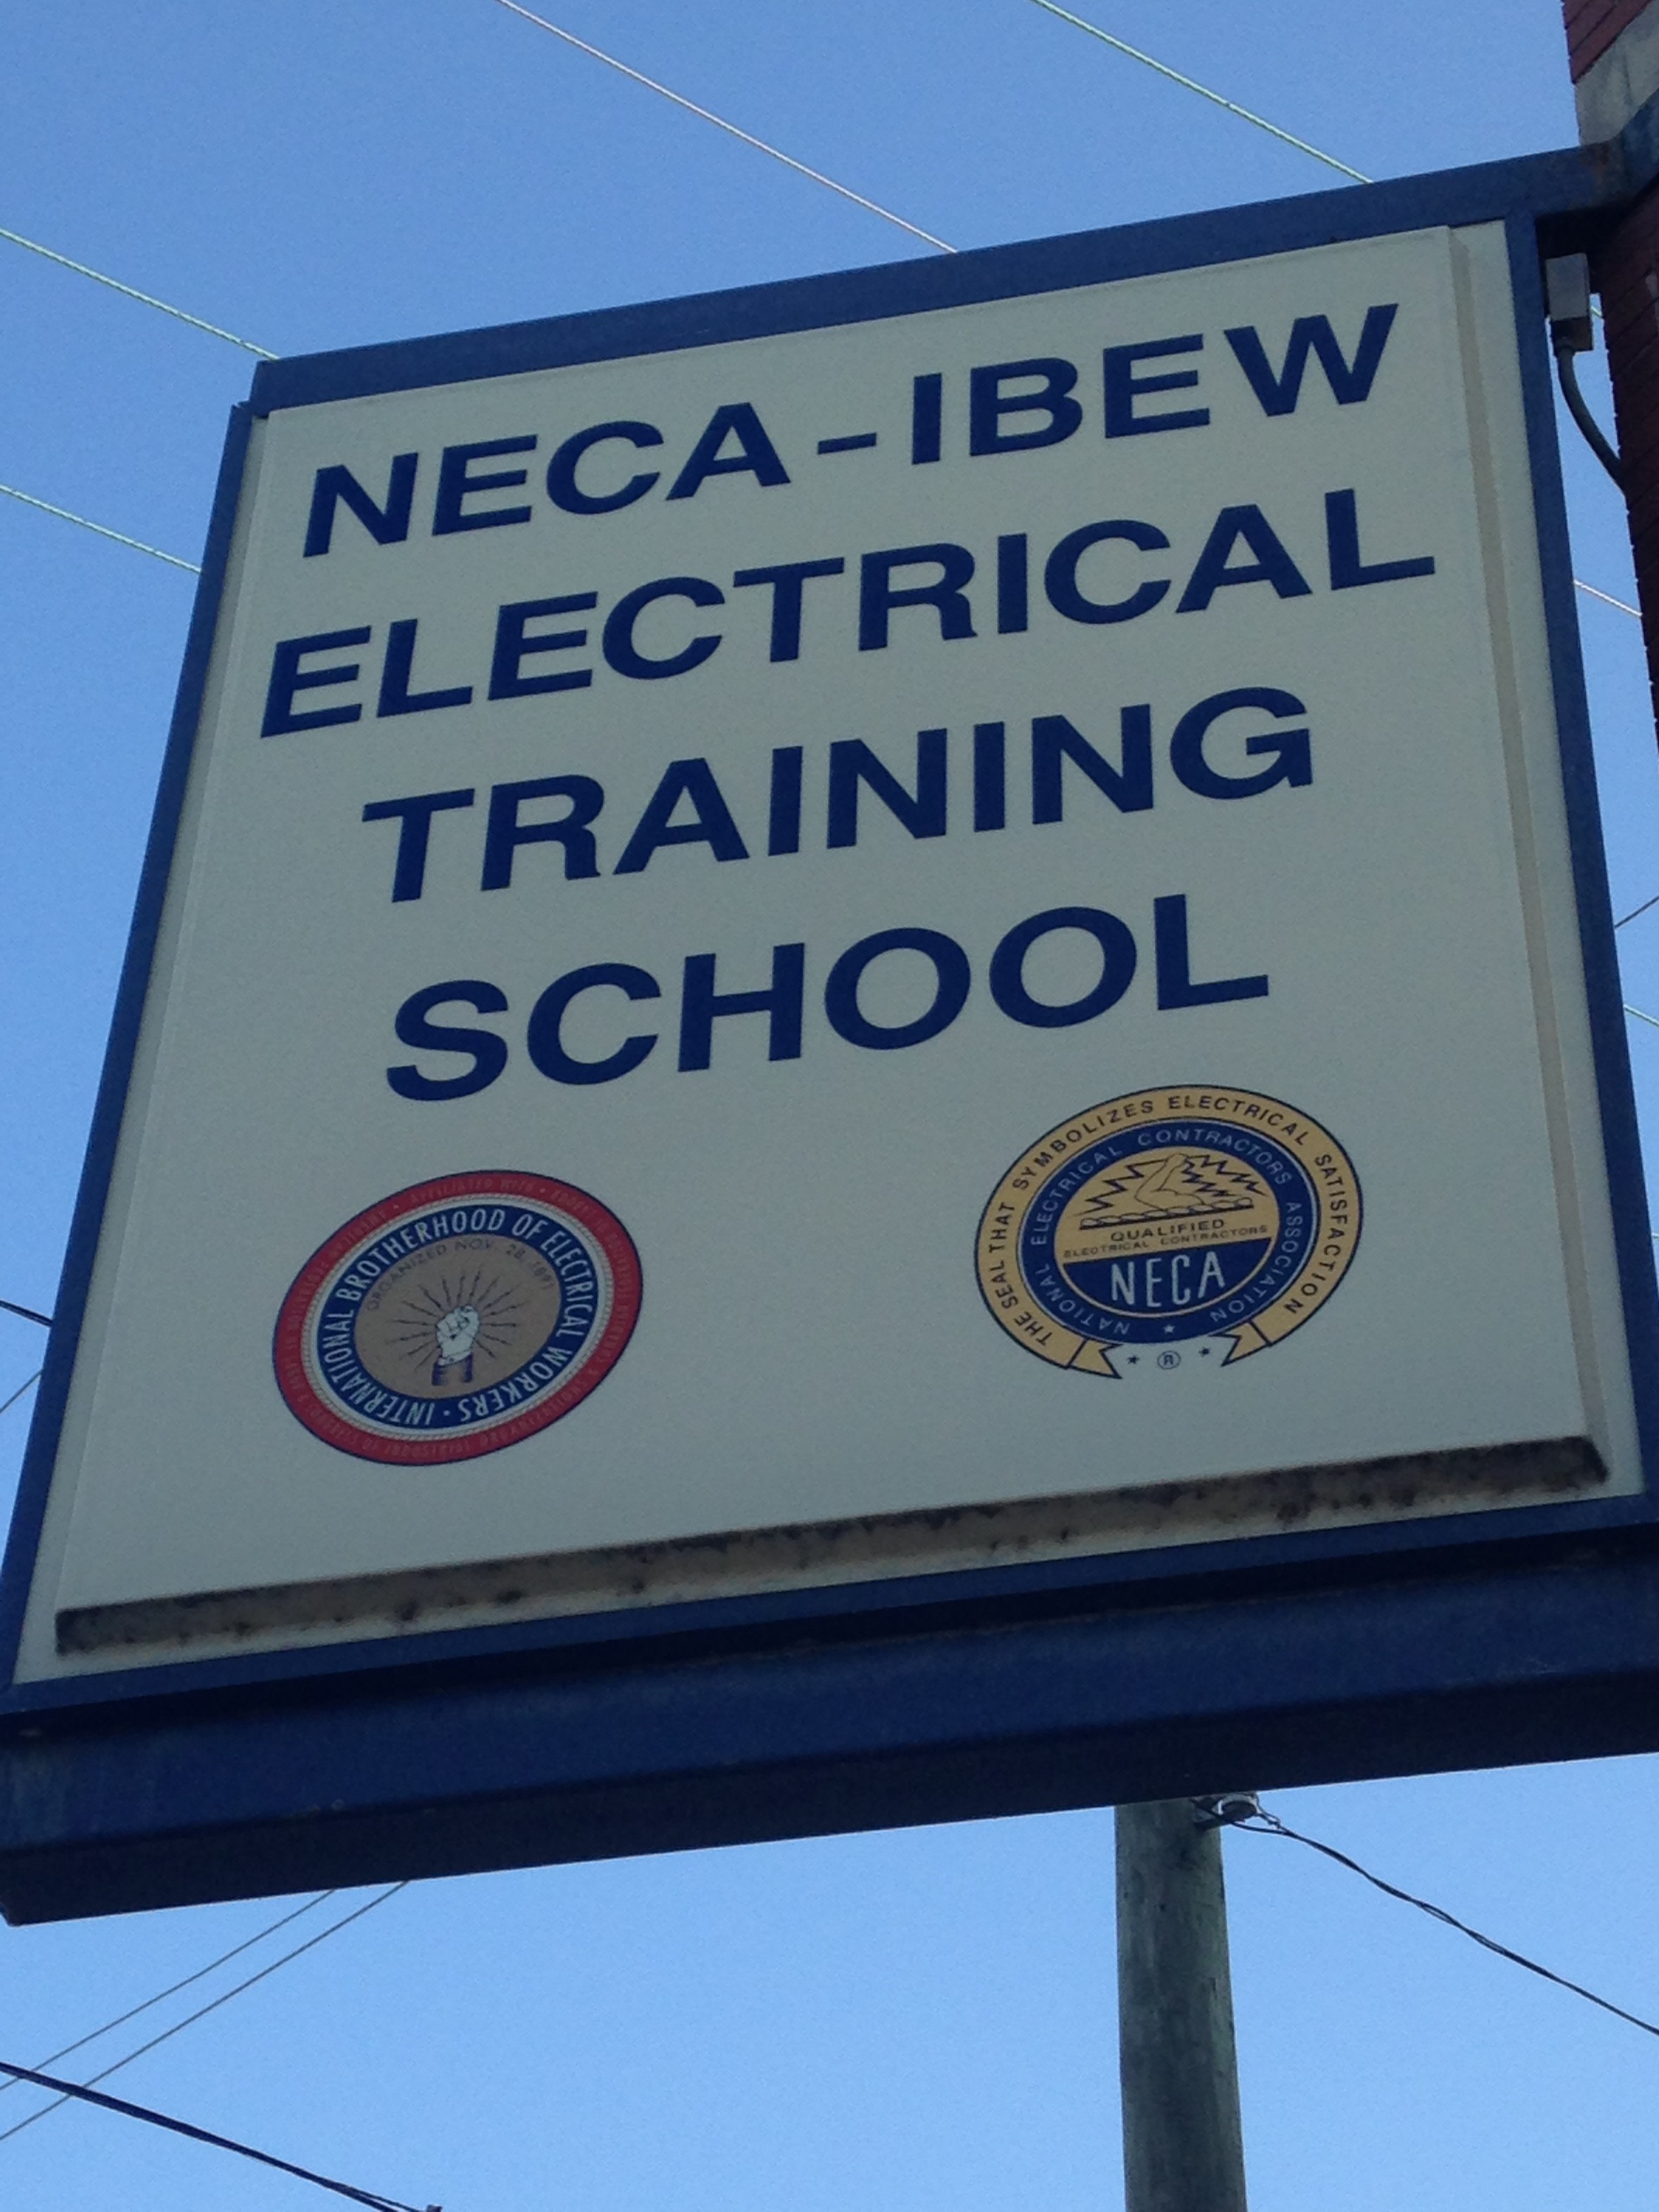 Sign outside of the NECA/IBEW Electrical Training School